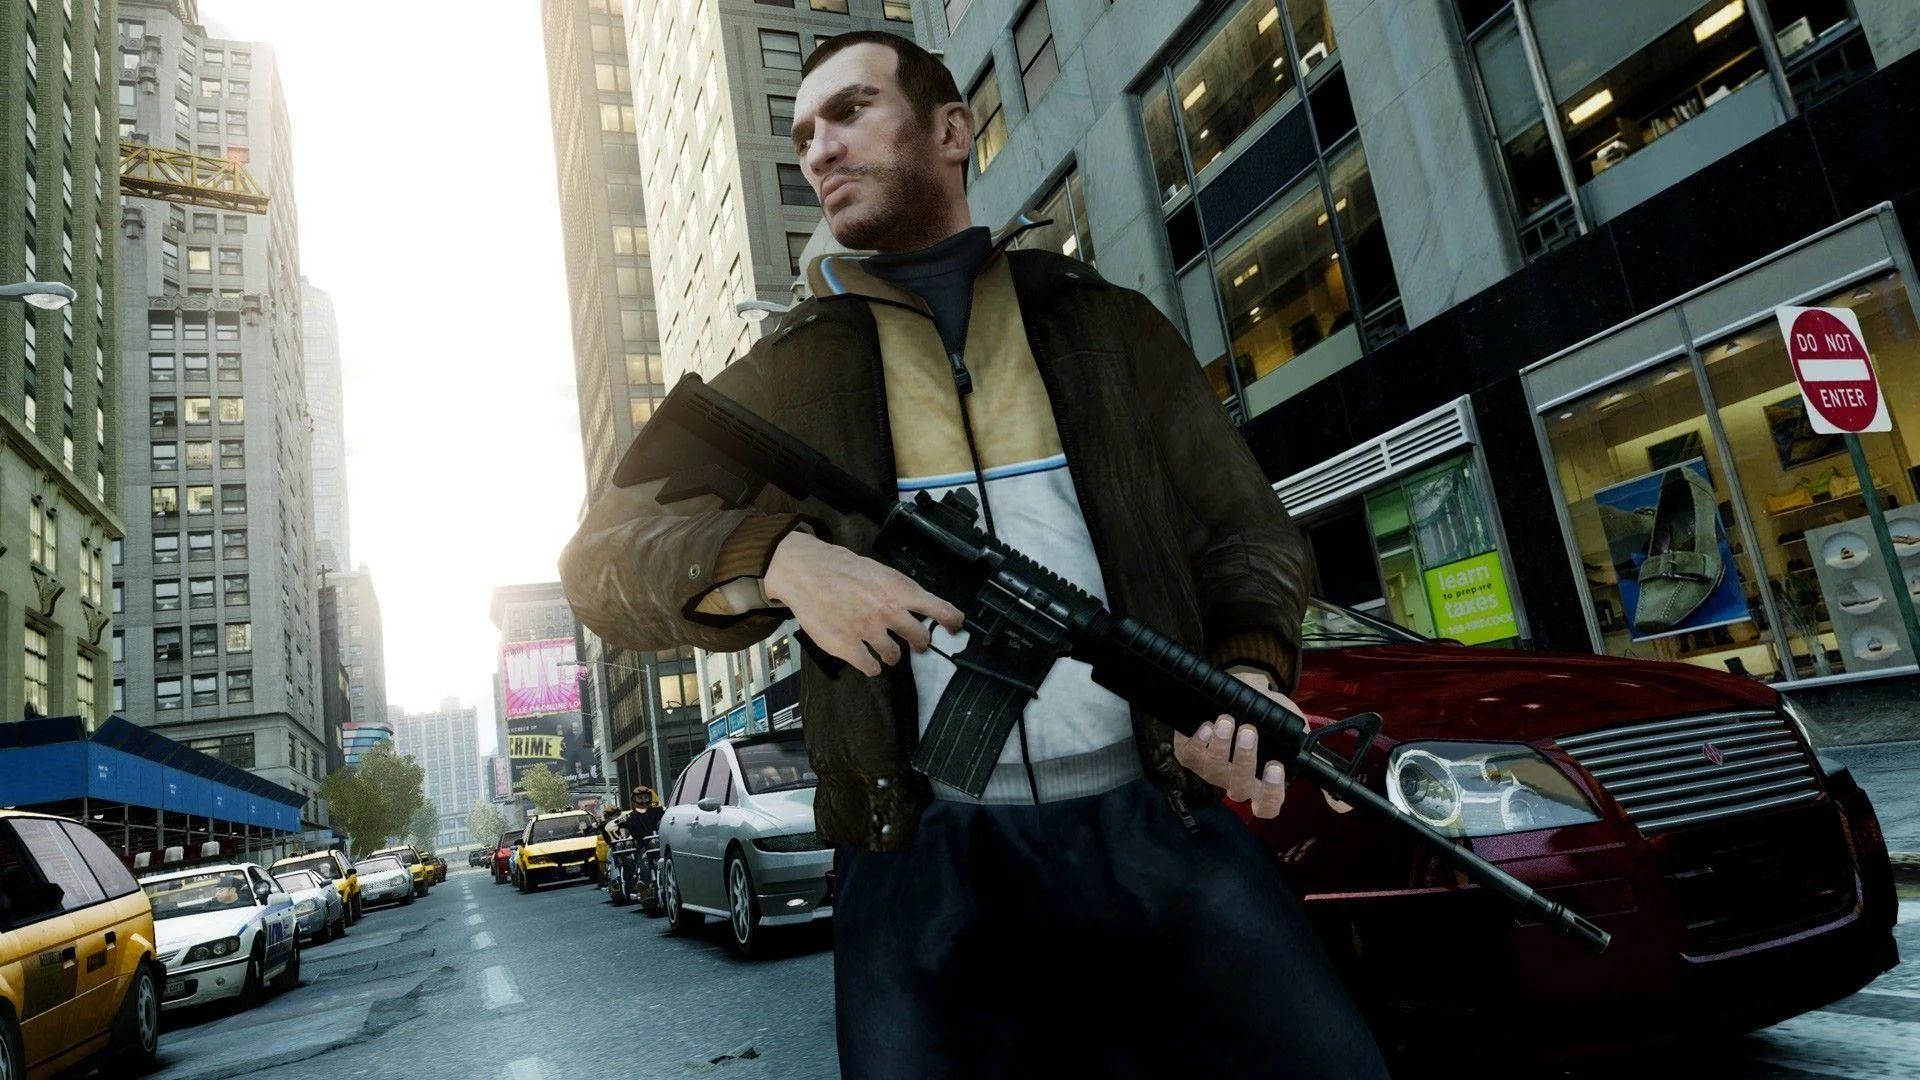 The user showed what GTA IV would look like with new graphics